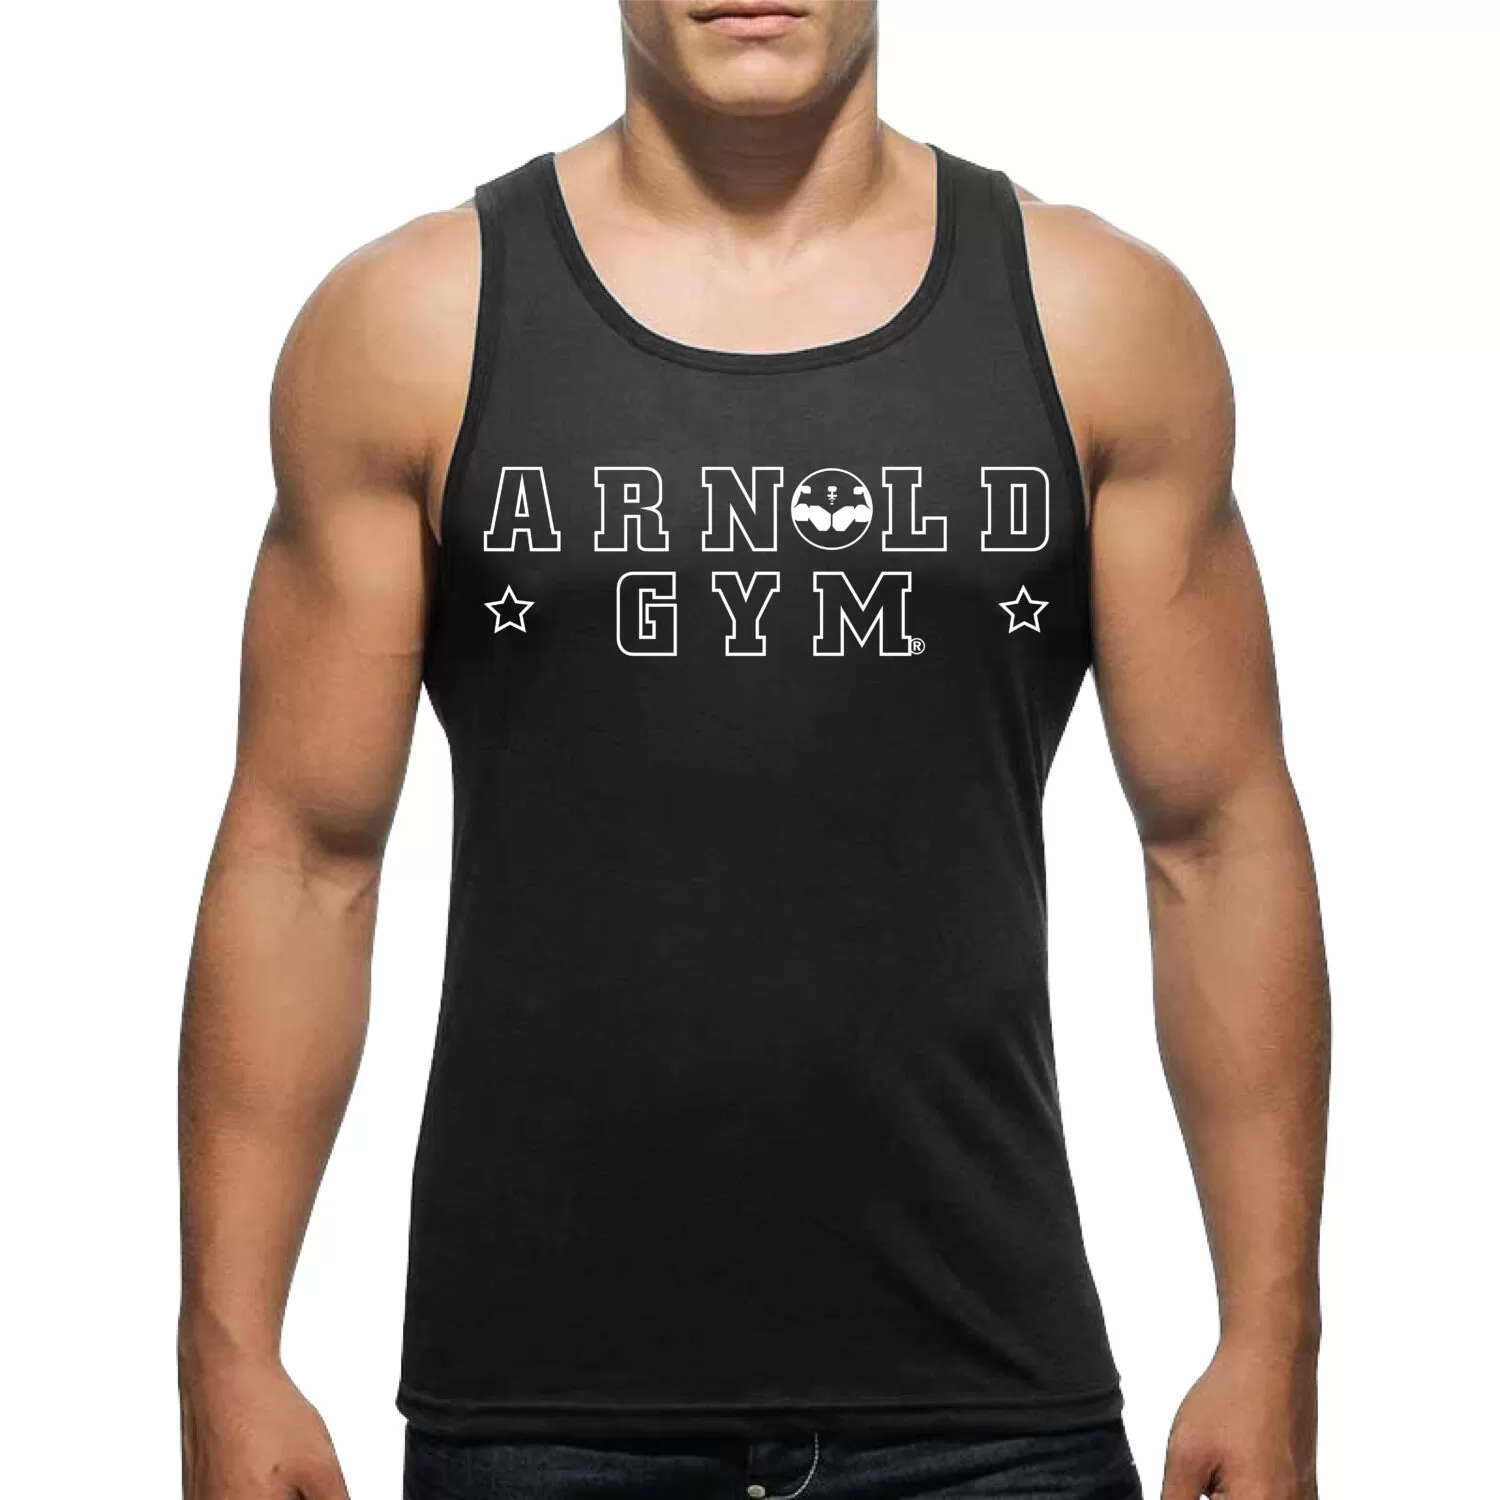 https://www.arnoldgymgear.com/wp-content/uploads/2022/01/arnoldgym-dry-fit-top-basic-muscle-cut-in-black-2.webp